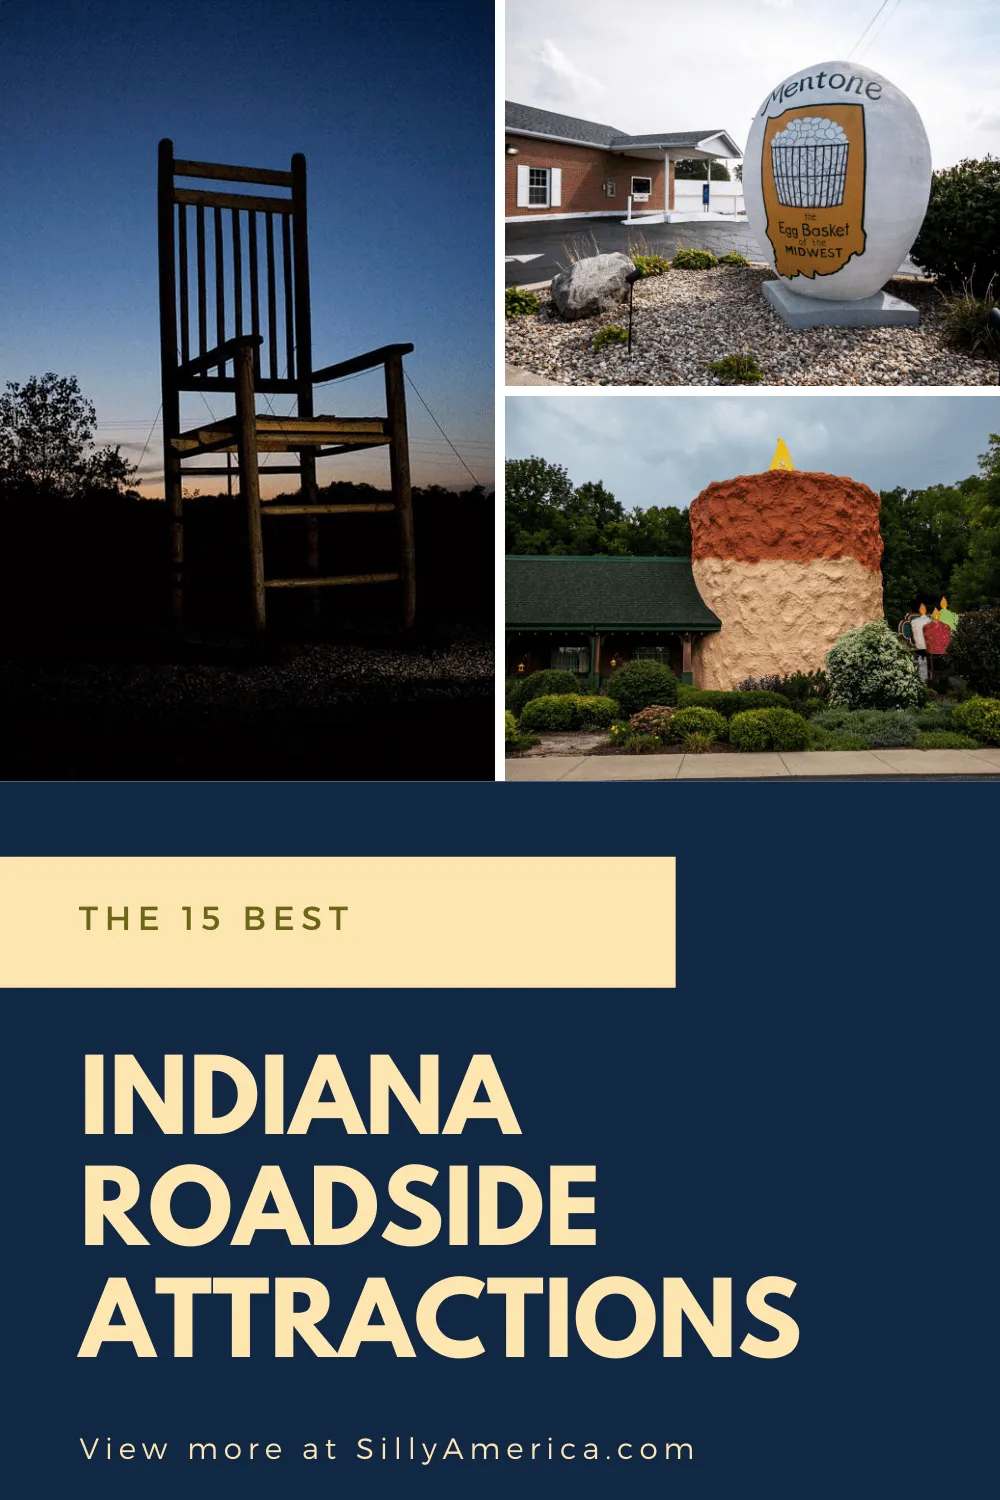 The best Indiana roadside attractions to visit on an Indiana road trip. Add these roadside oddities to your travel bucket list, itinerary, or route map! These fun places to visit in Indiana are must see road trip stops for kids or adults. #IndianaRoadsideAttractions #IndianaRoadsideAttraction #RoadsideAttractions #RoadsideAttraction #RoadTrip #IndianaRoadTrip #PlacesToVisitInIndiana #IndianaRoadTripIdeas #IndianaRoadTripWithKids #IndianaTravel #ThingsToDoInIndiana #WeirdRoadsideAttractions